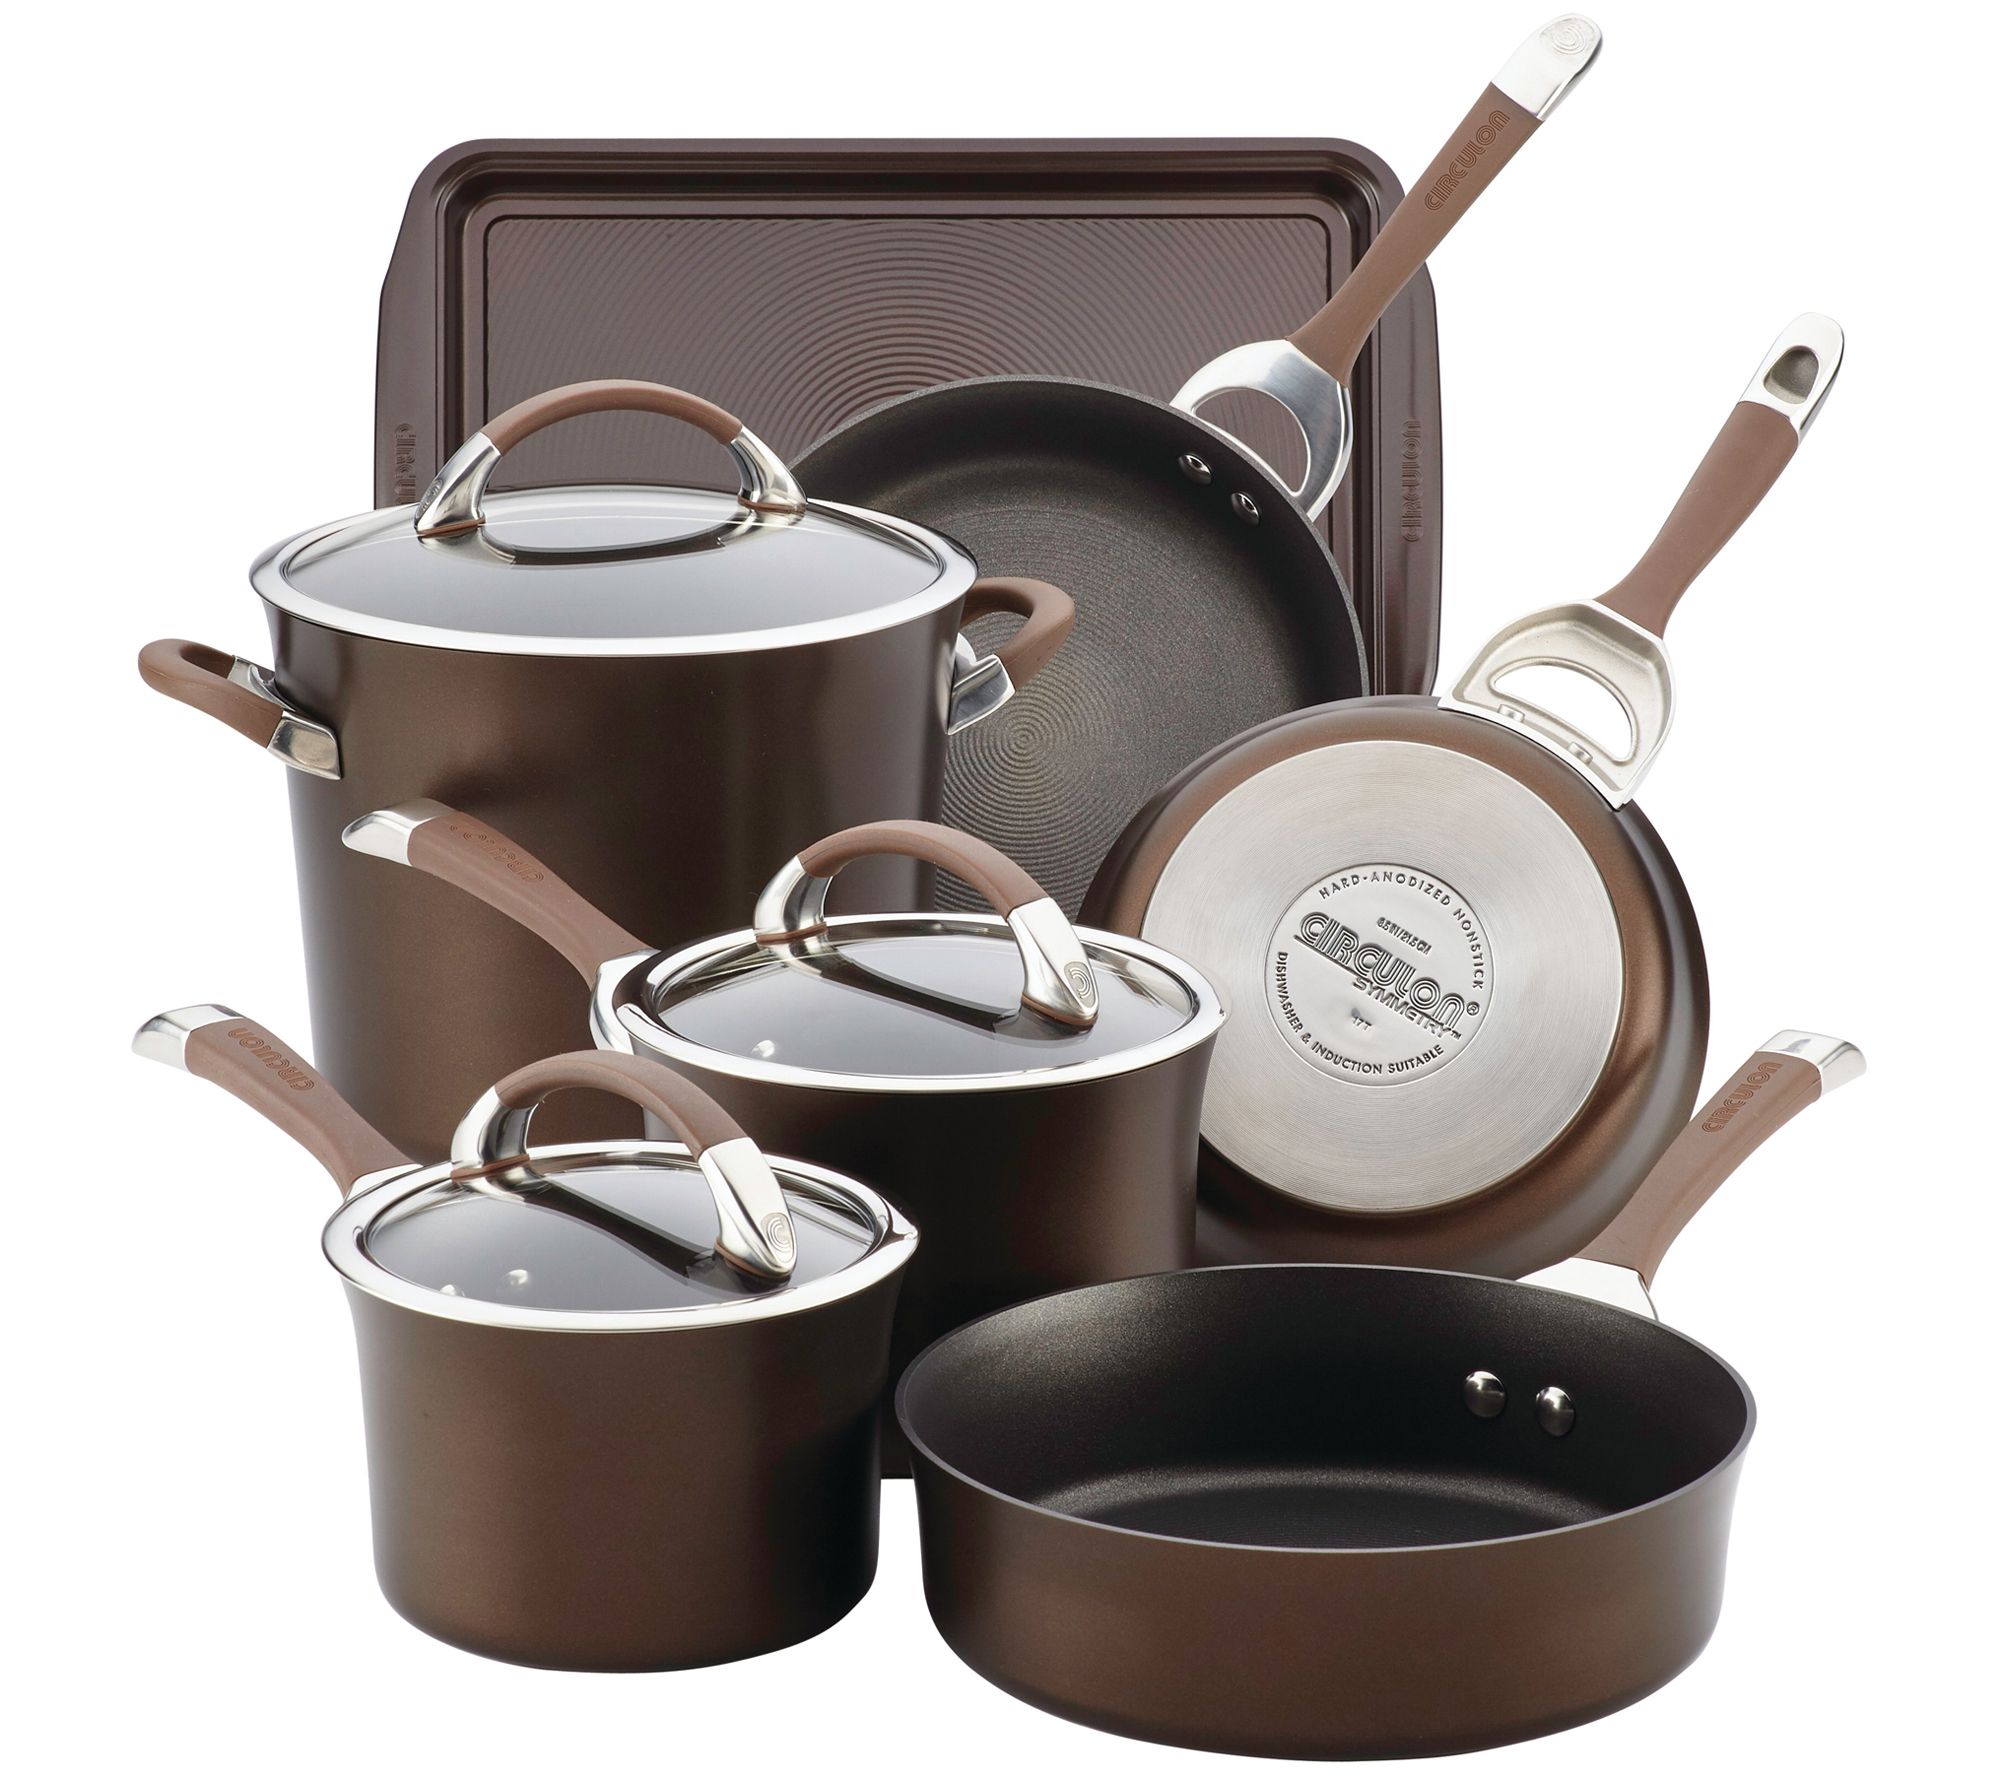 Circulon Symmetry Hard Anodized Nonstick Cookware Utensil and Recipe  Booklet Set, 7 Piece, Chocolate